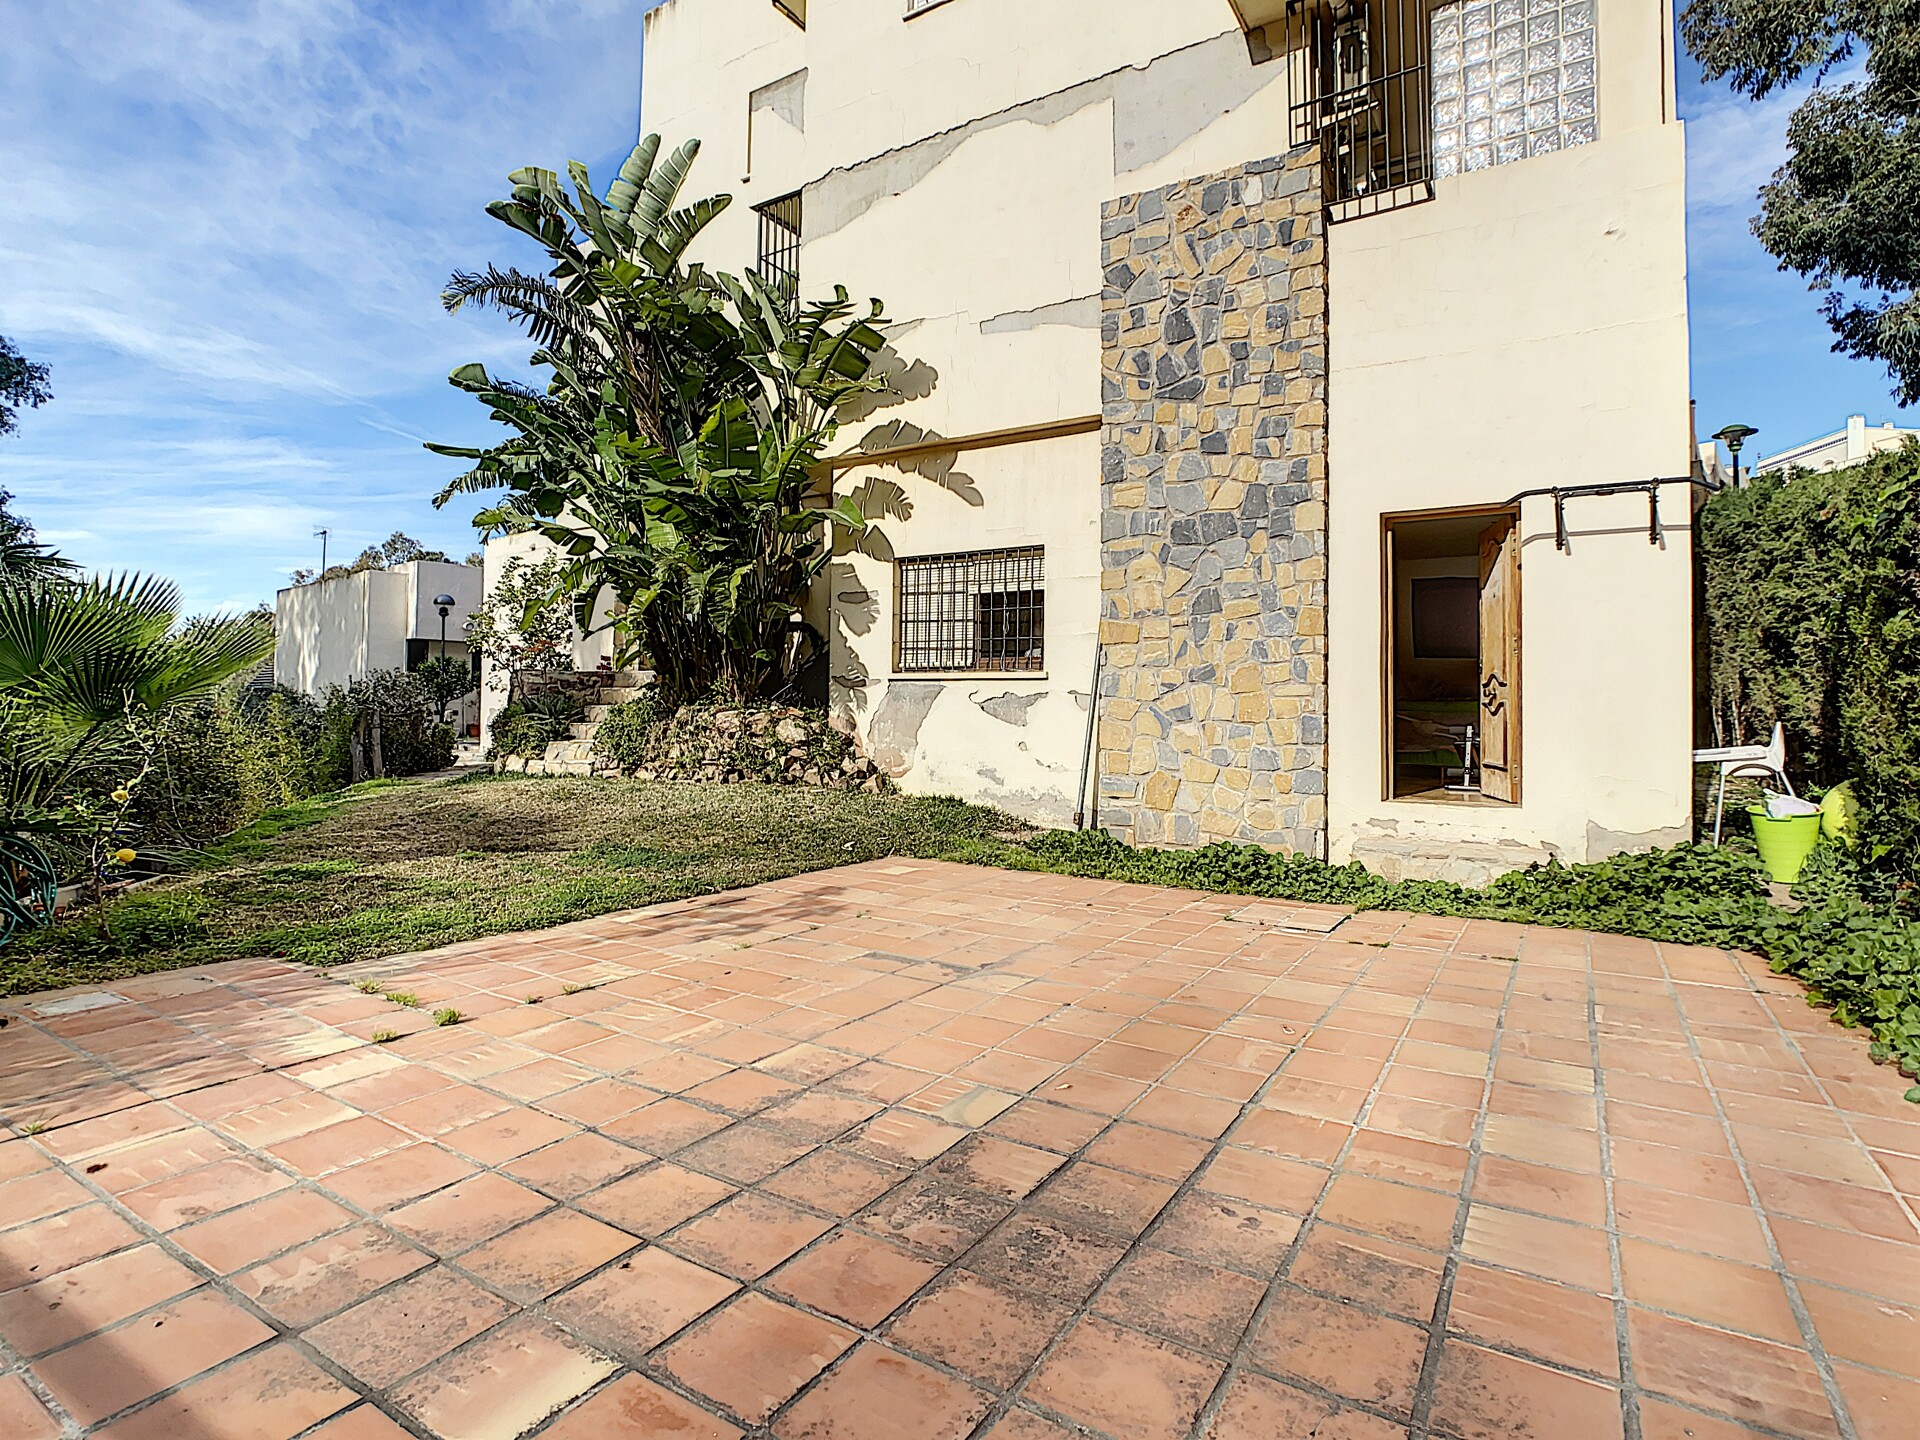 Residential For Sale, Single Family Home Malaga 29018, Spain | CENTURY ...